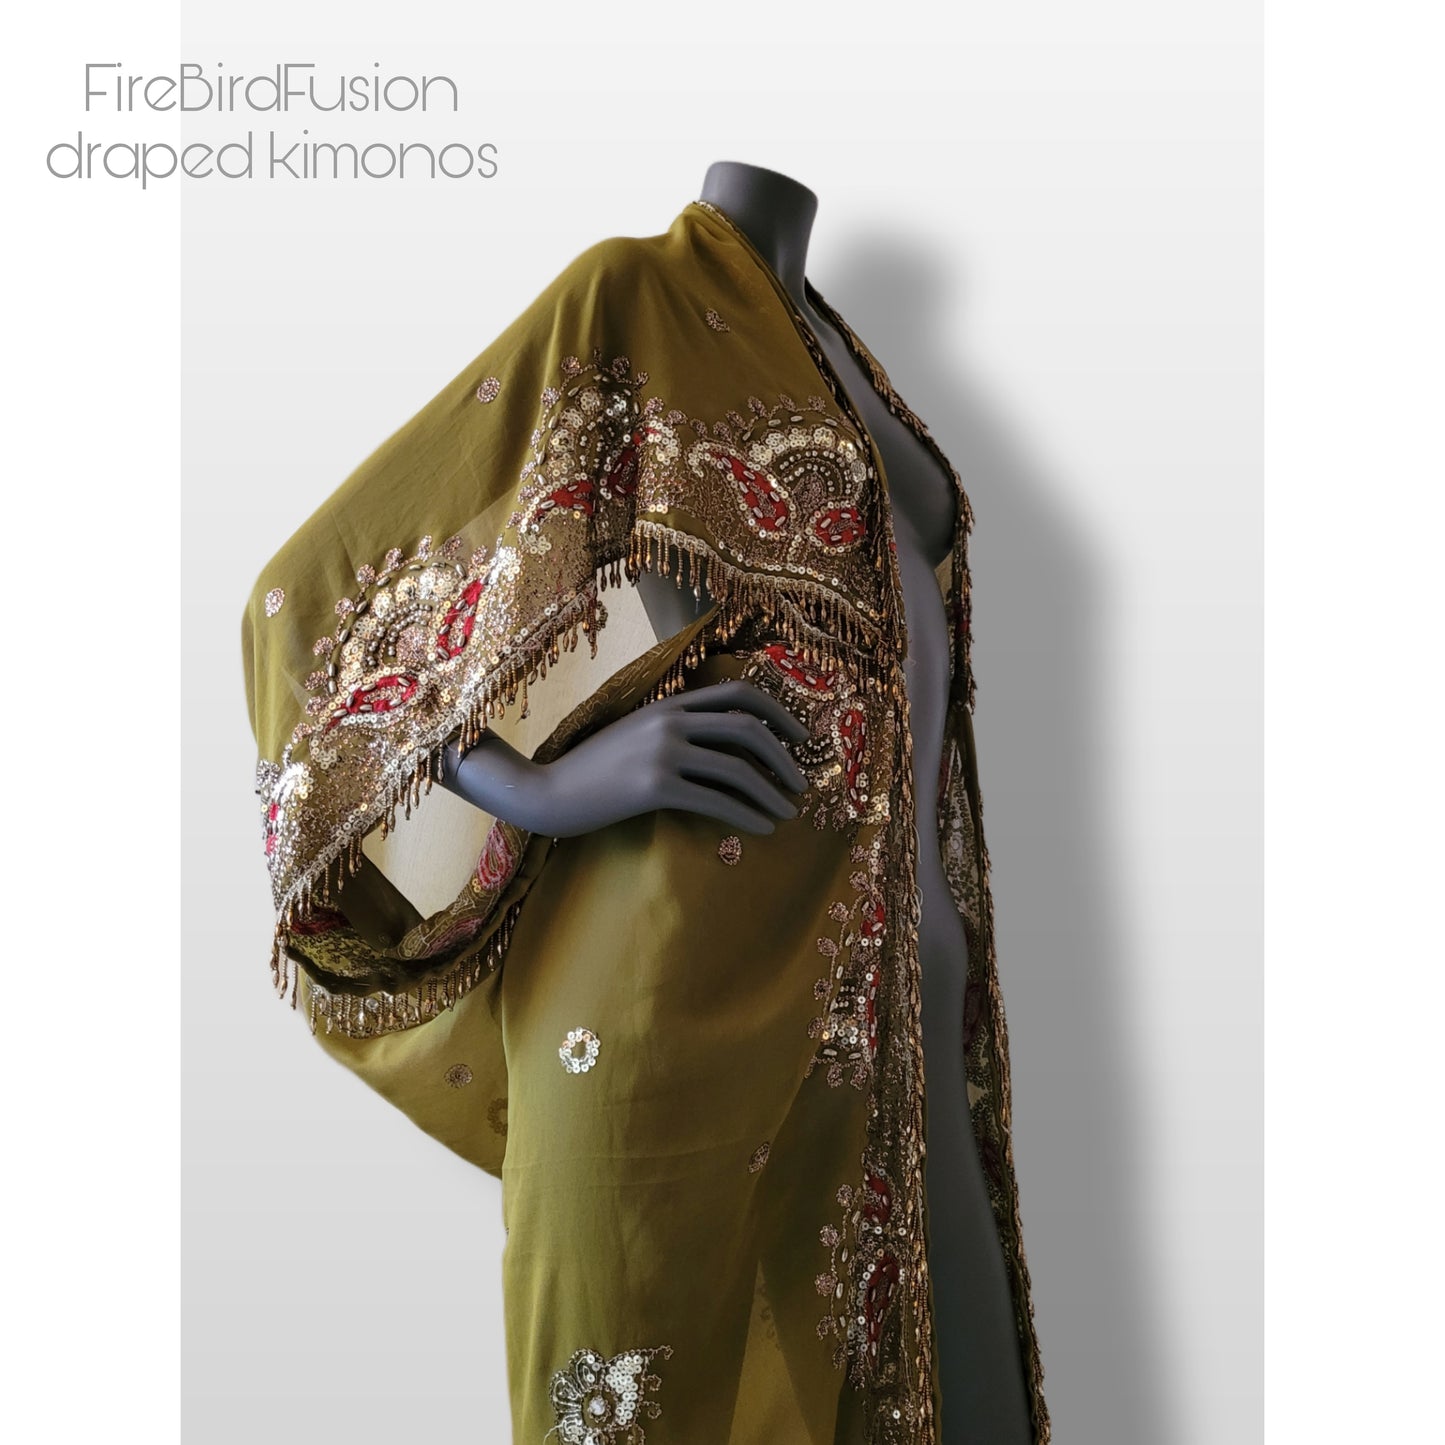 Draped kimono in light olive green with broad embroidered trim in gold, silver and red and beaded fringe (M)